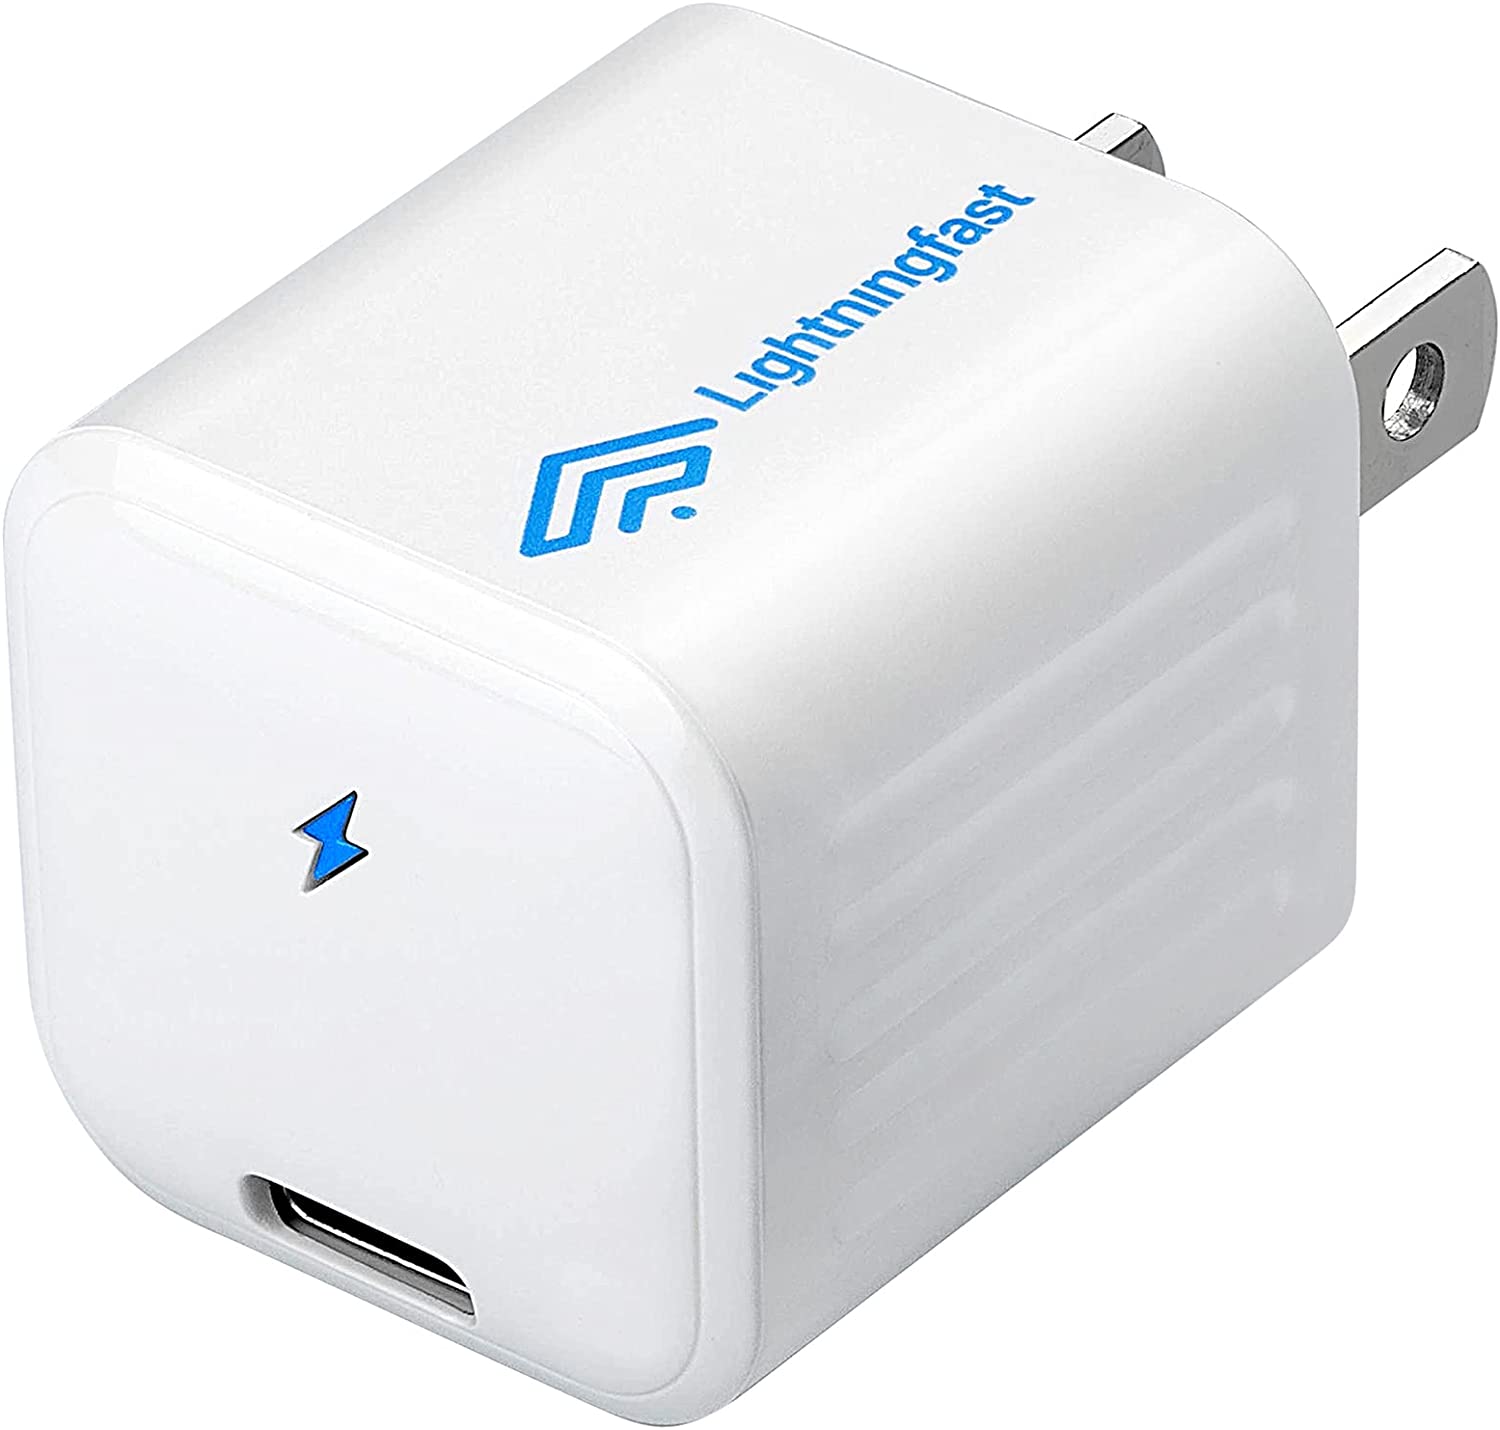 Lightningfast Wall Charger Render Cropped